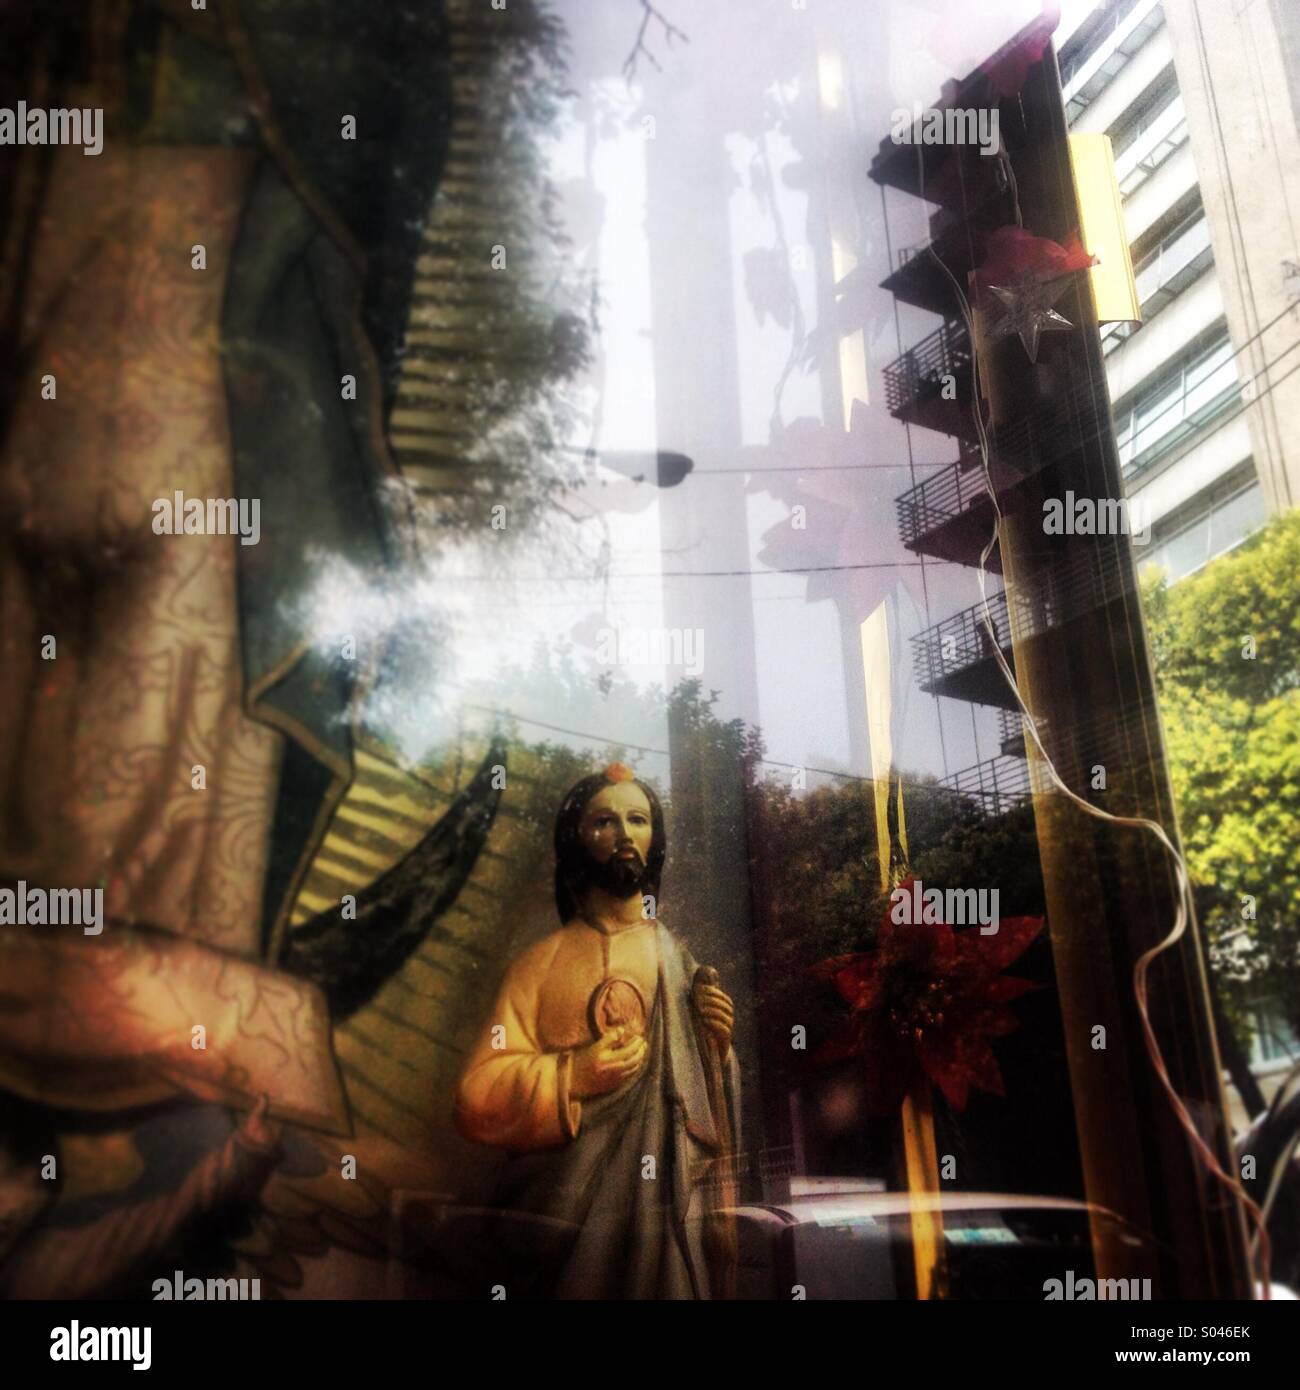 A building is reflected in an altar decorated with a sculpture of saint Jude Thaddeus in Parque España, Colonia Roma, Mexico City, Mexico Stock Photo